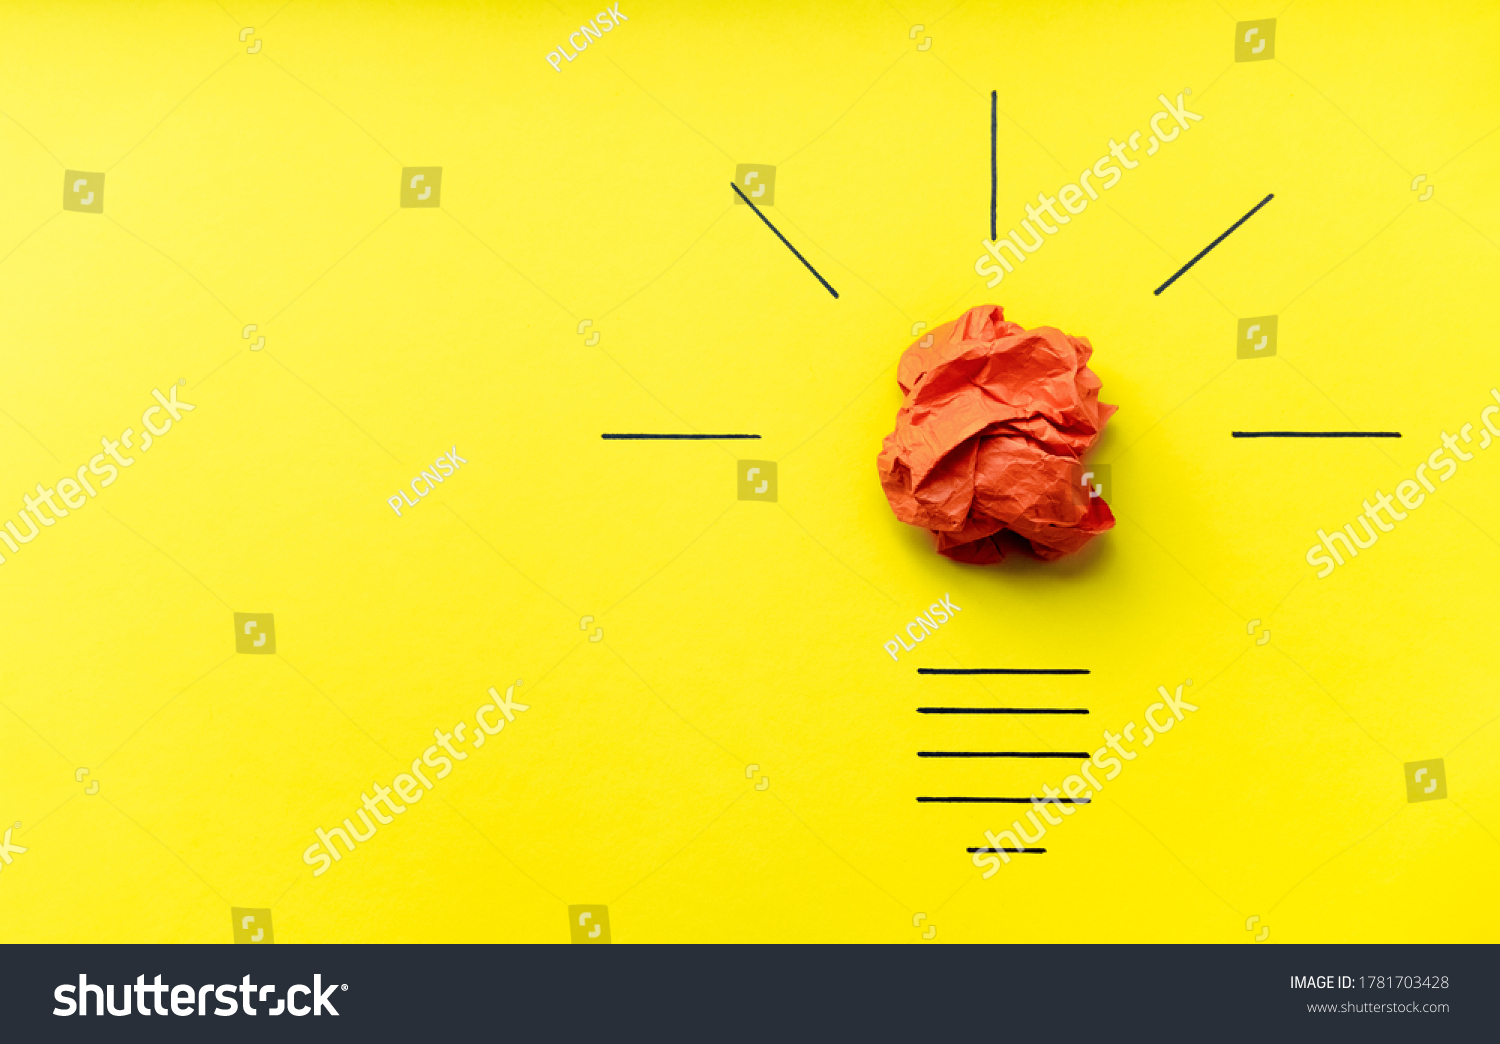 Light bulb over yellow background in vision and idea conceptual image. Conceptual image of creativity. Symbol of business strategy. Conceptual image of brainstorming, innovation and creativity #1781703428